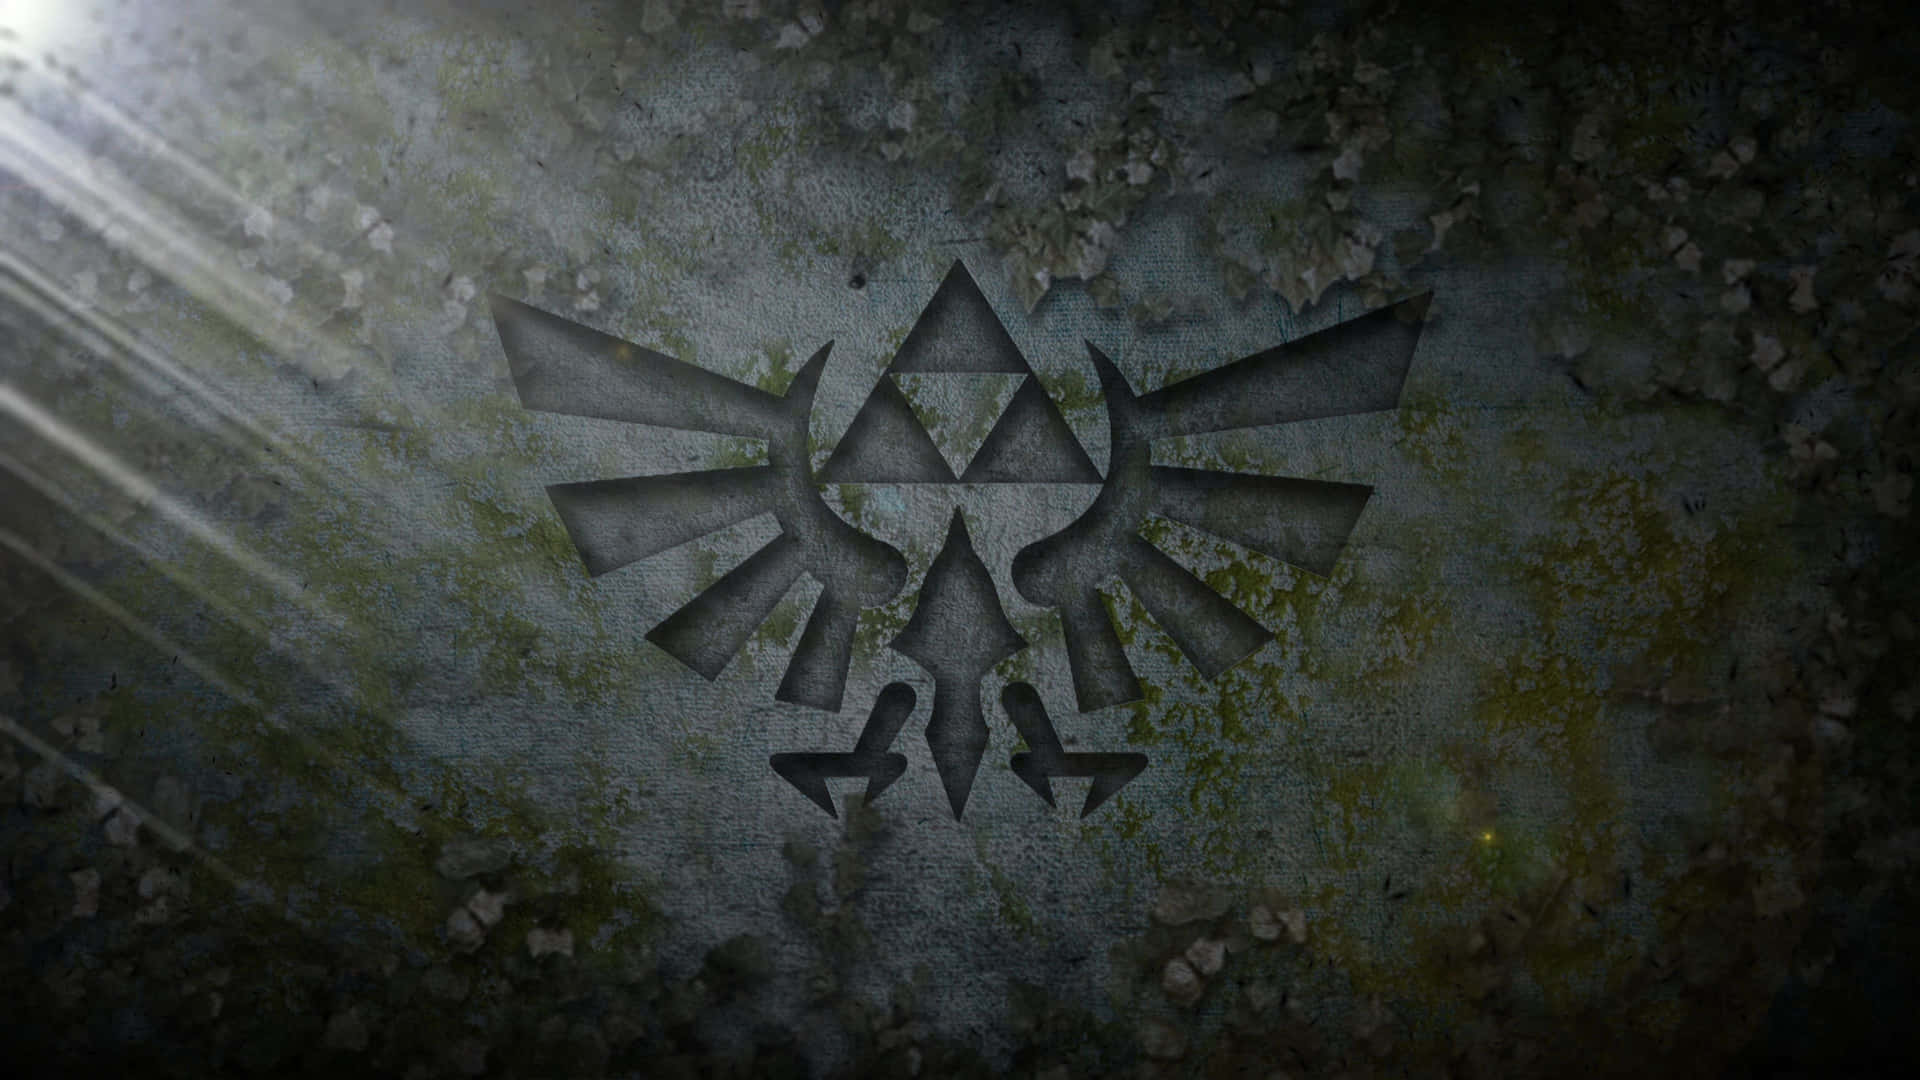 The Triforce is the Ultimate Power of the Ancient Kingdom of Hyrule. Wallpaper